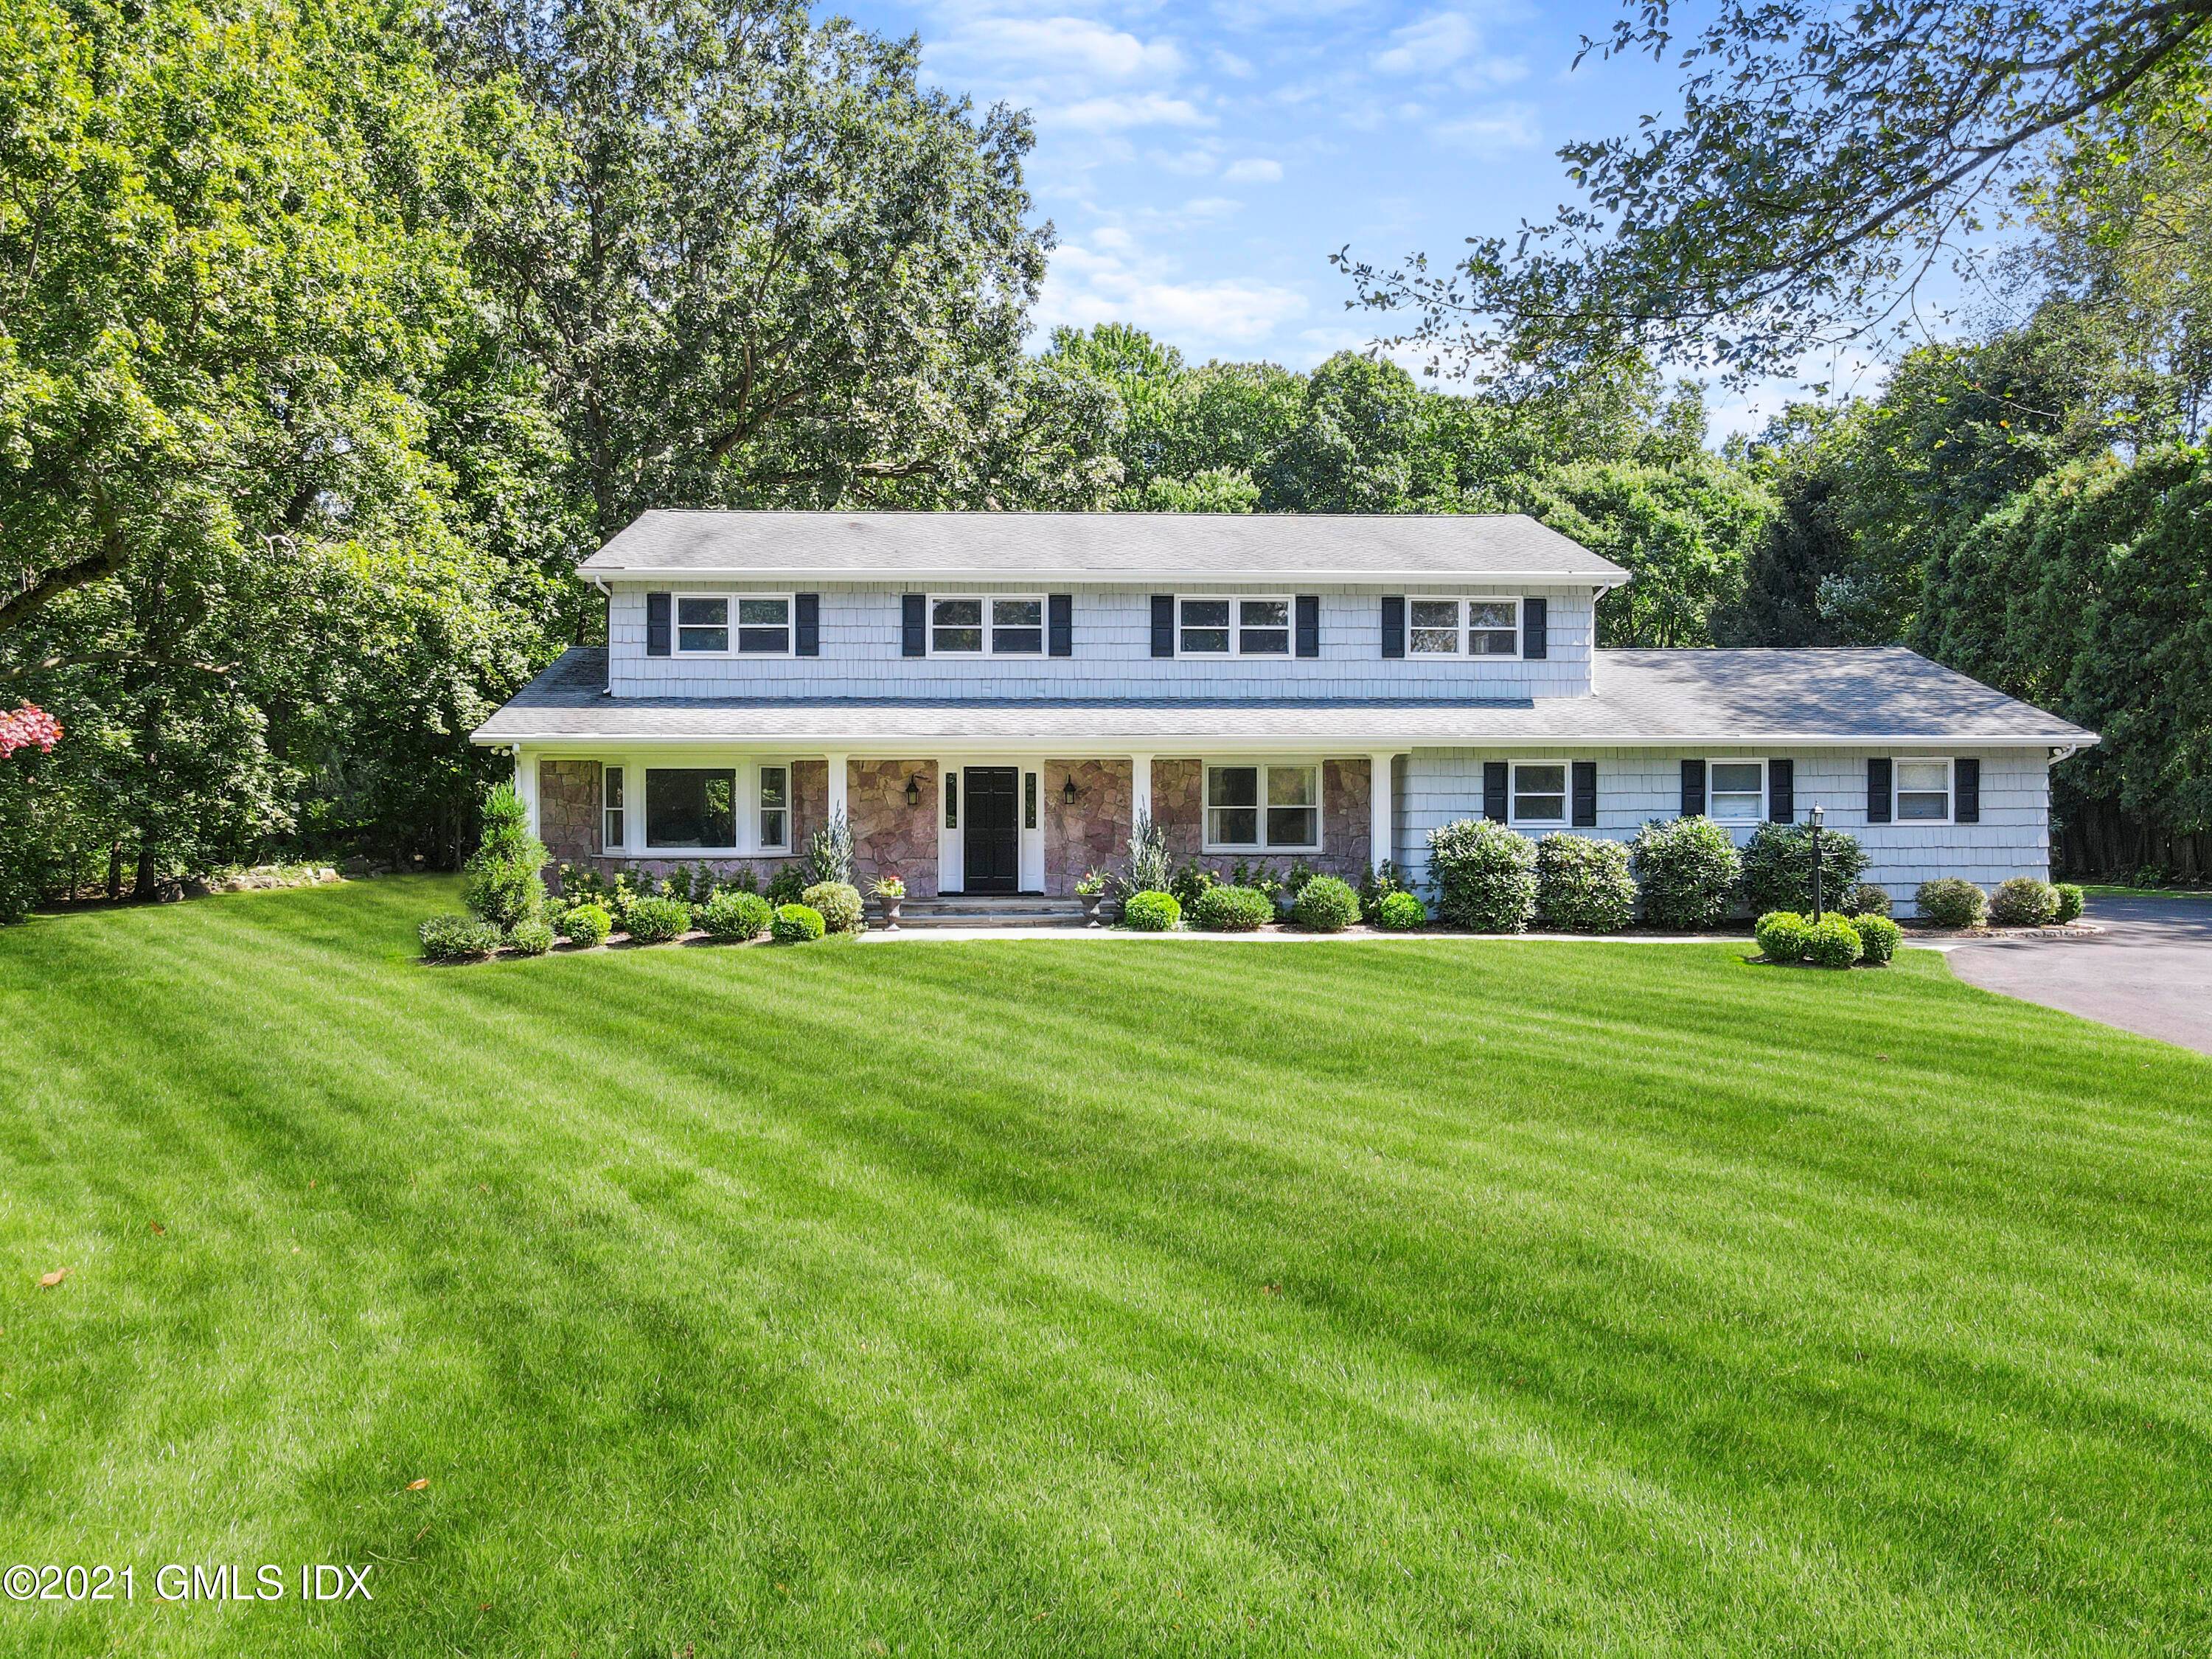 Private and peaceful 2. 39 acres offers gracious five bedroom Colonial with sparkling gunite pool, built in Viking bbq on expansive bluestone terrace, front porch and large level play yard ...